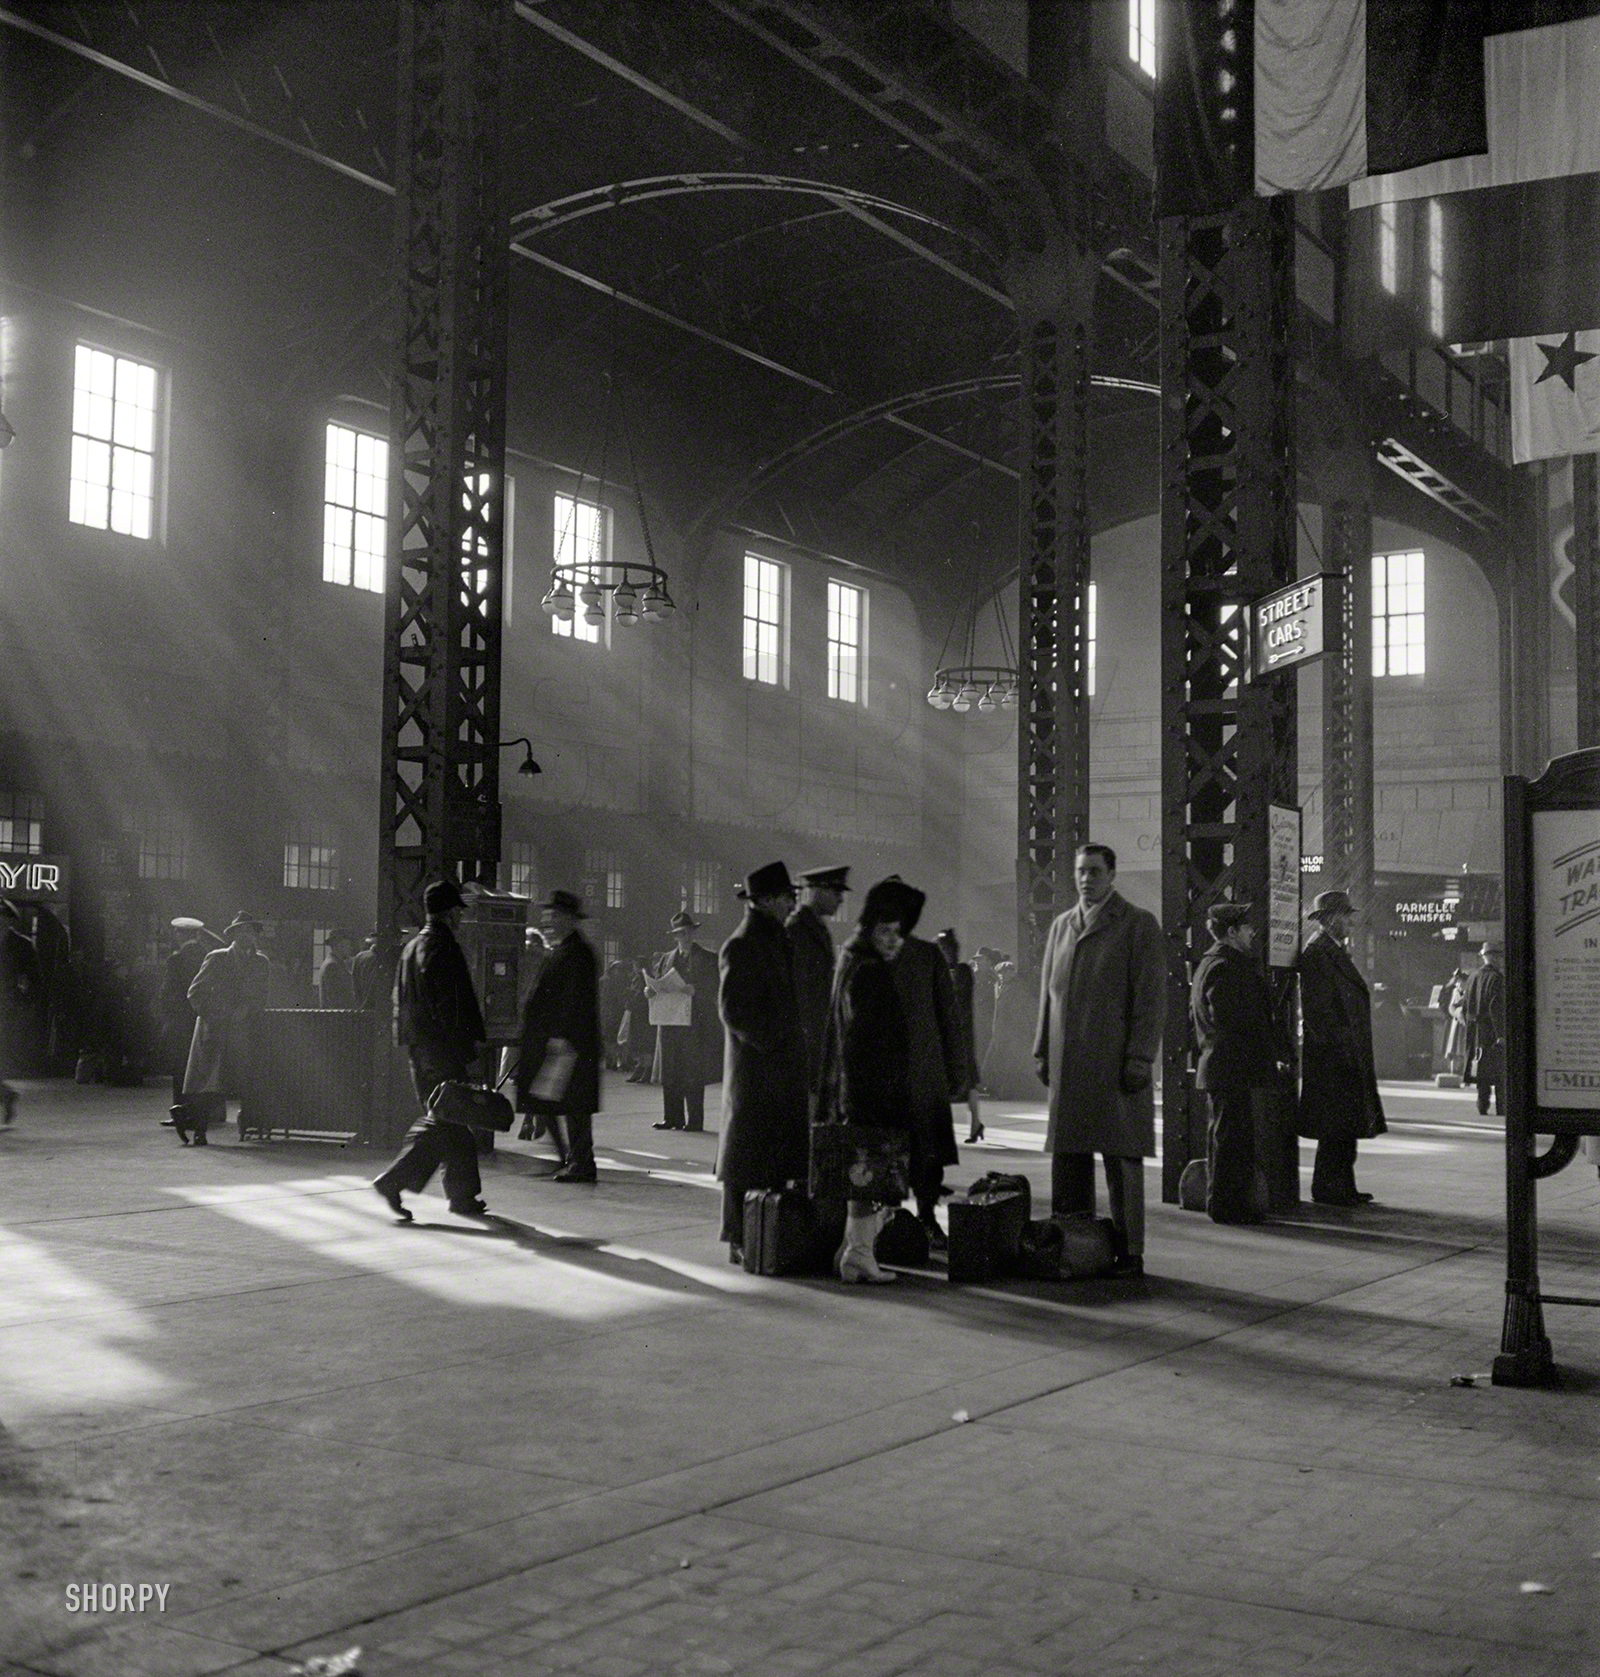 January 1943. "Chicago, Illinois. Waiting for trains in the concourse of the Union Station." Photo by Jack Delano, Office of War Information. View full size.